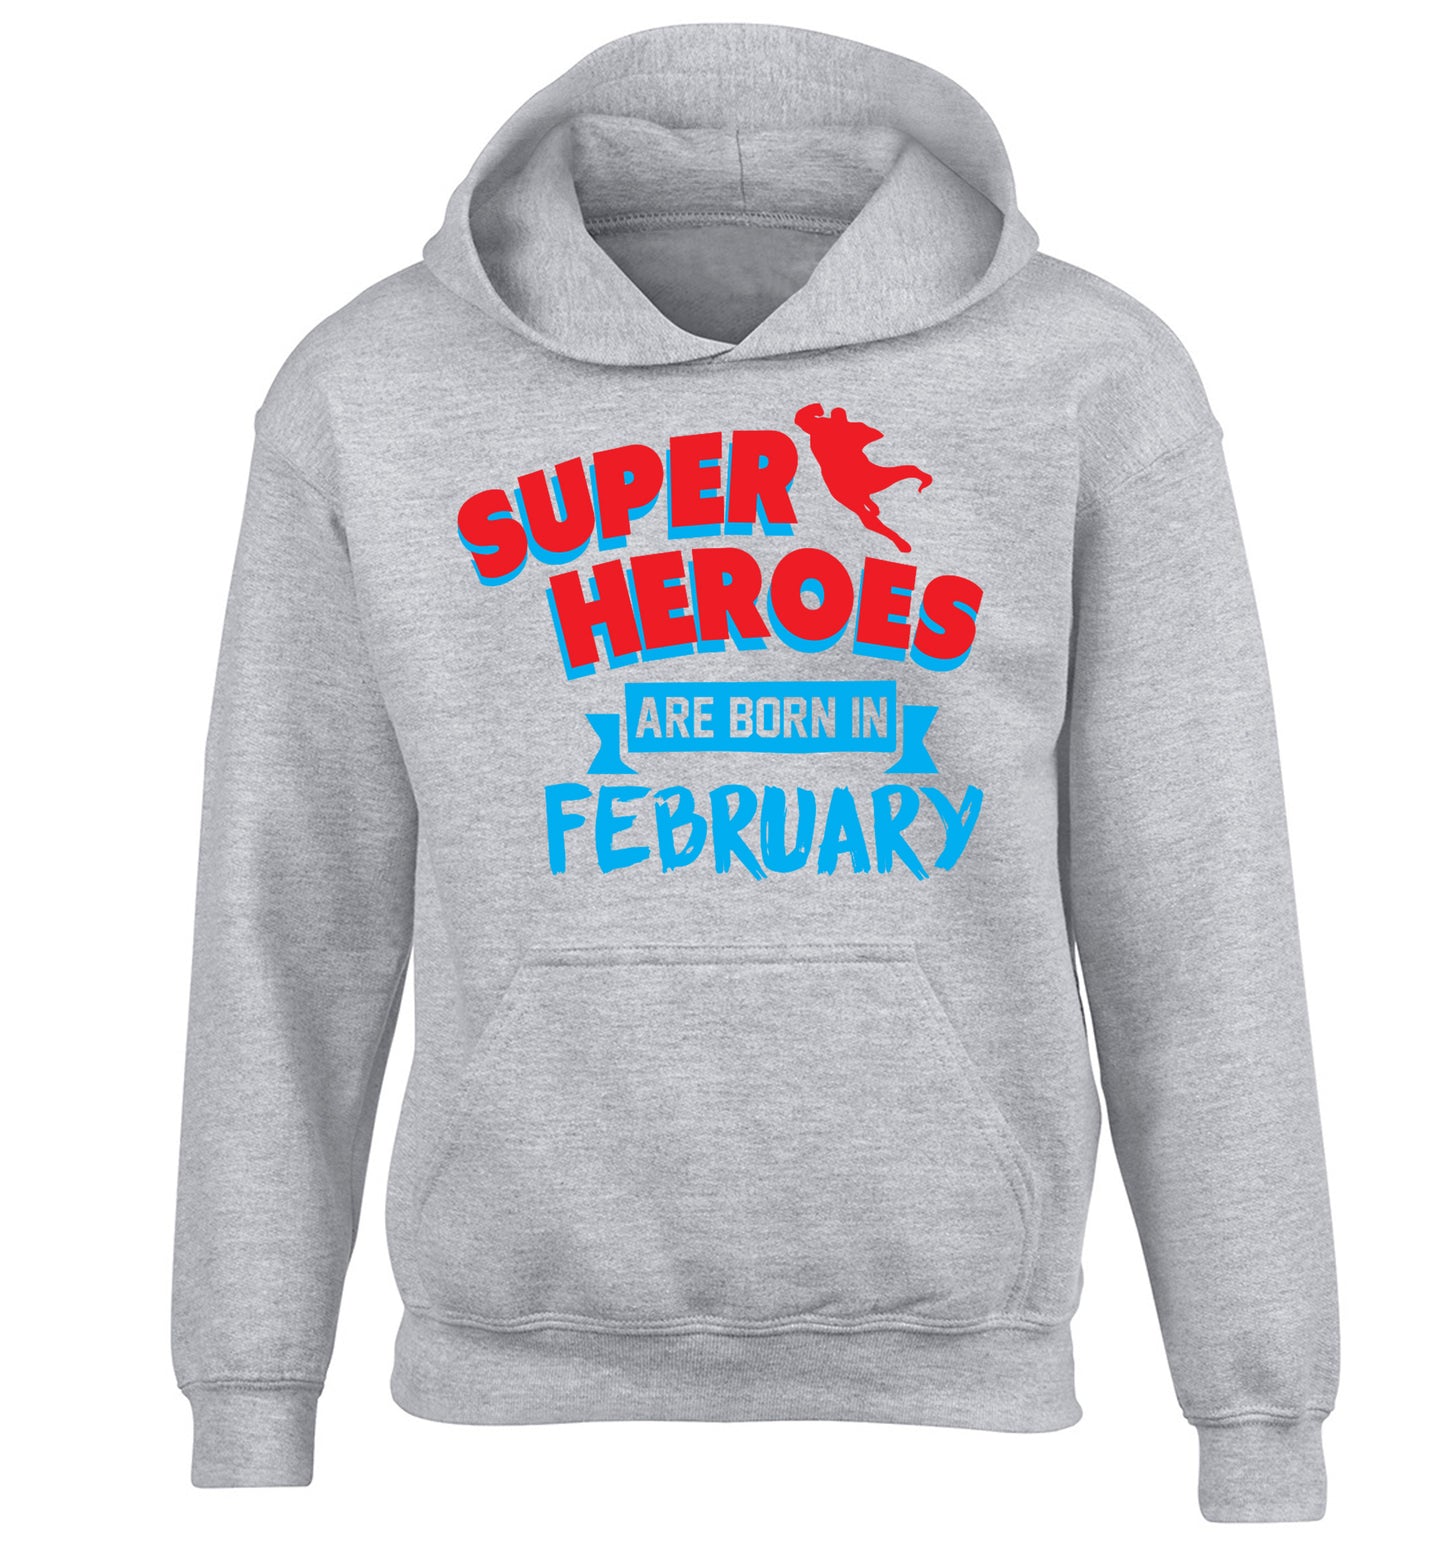 superheroes are born in February children's grey hoodie 12-13 Years